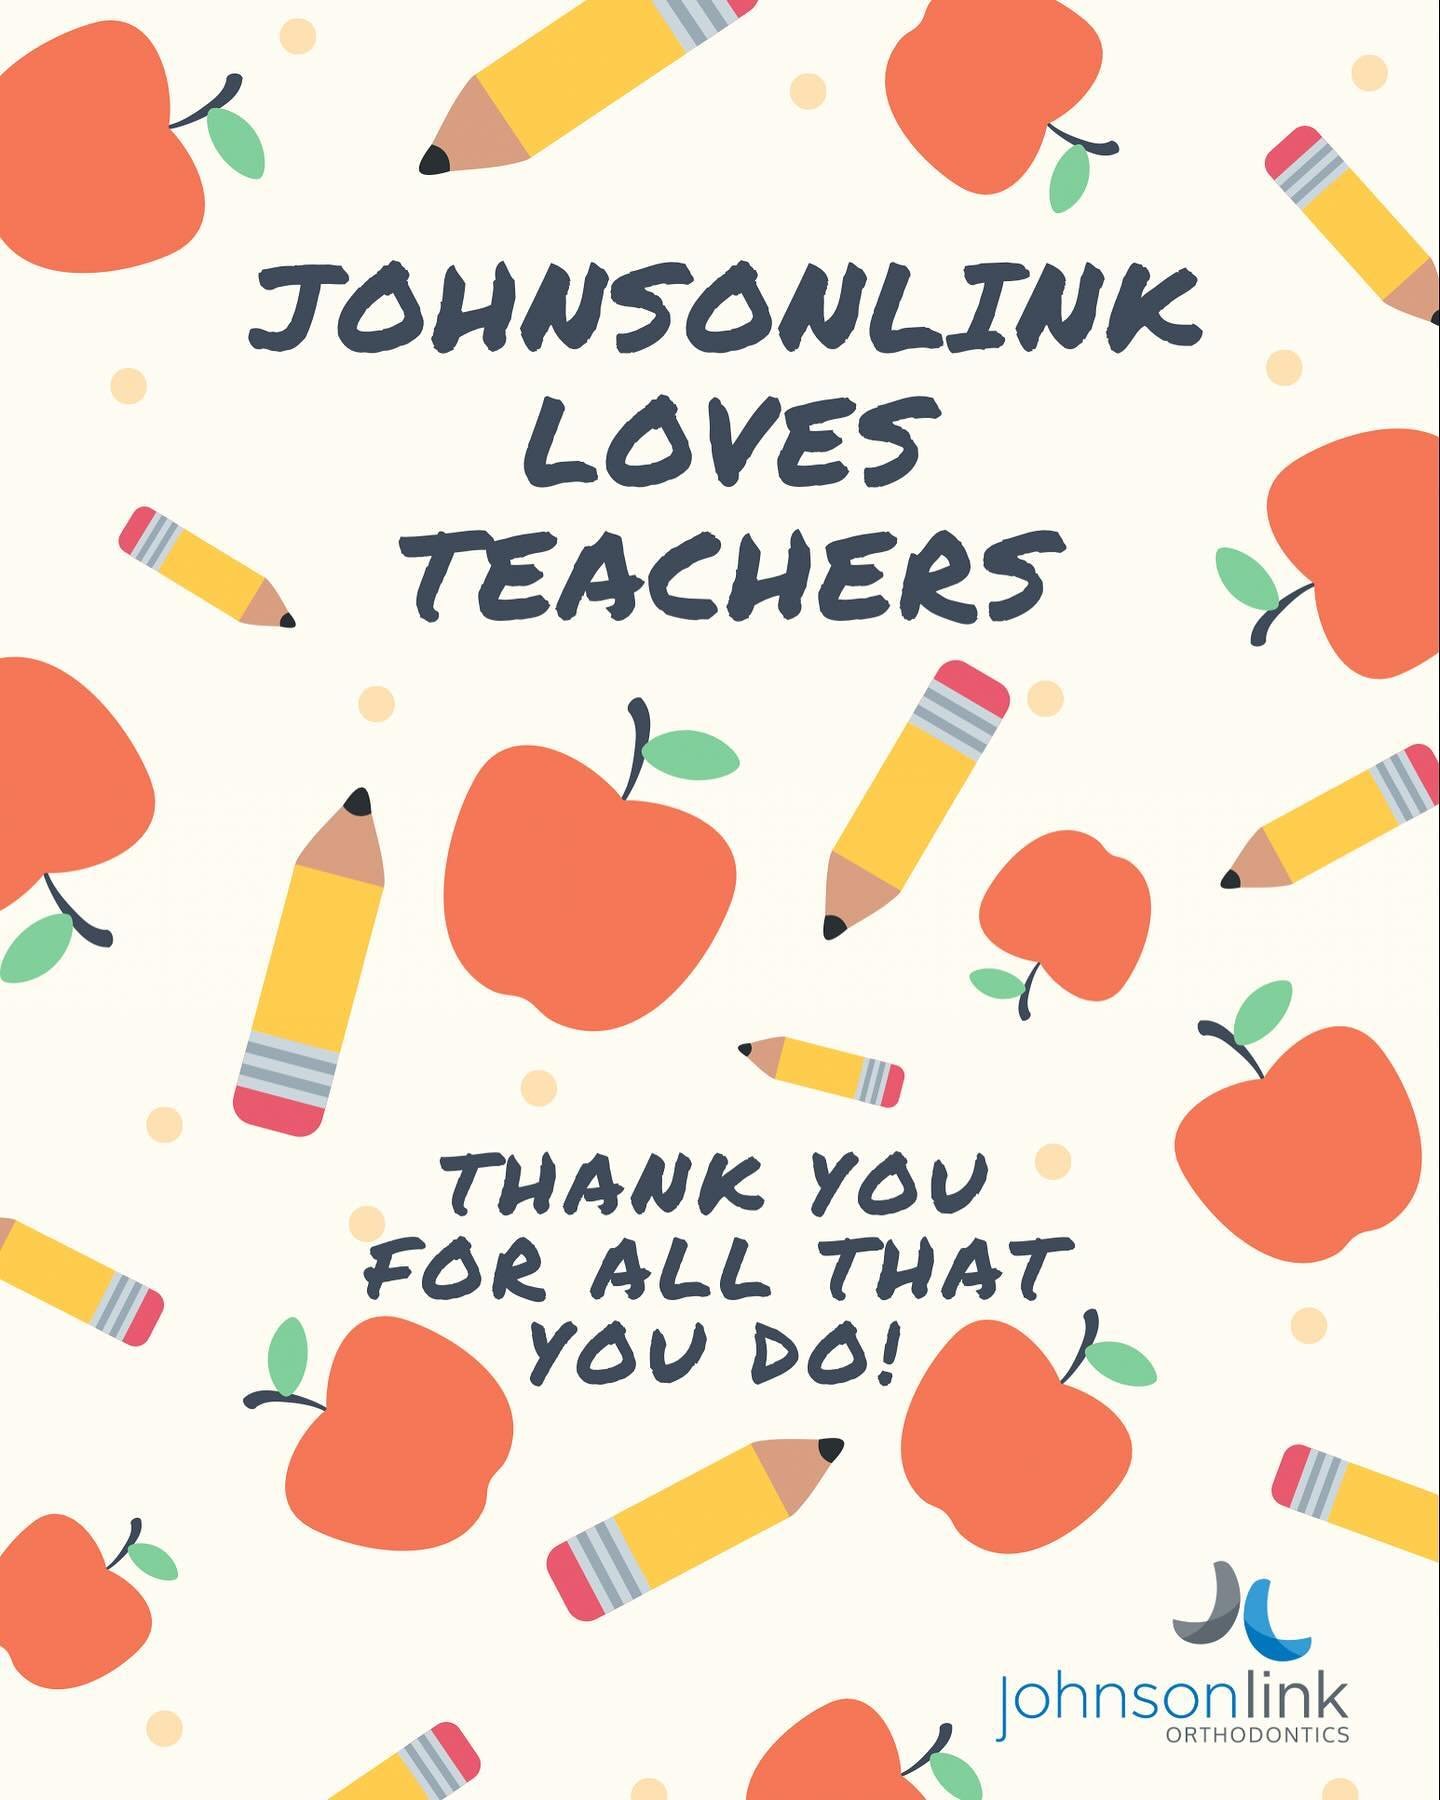 Happy Teacher&rsquo;s Day🍎✏️ ⁣
⁣
Because we appreciate all you do to help in the education and growth of students, we extend a 10% courtesy on Orthodontic Treatment for all Teachers and Educators. ⁣
&bull;⁣
&bull;⁣
&bull;⁣
#Invisalign #Johnsonlinkor